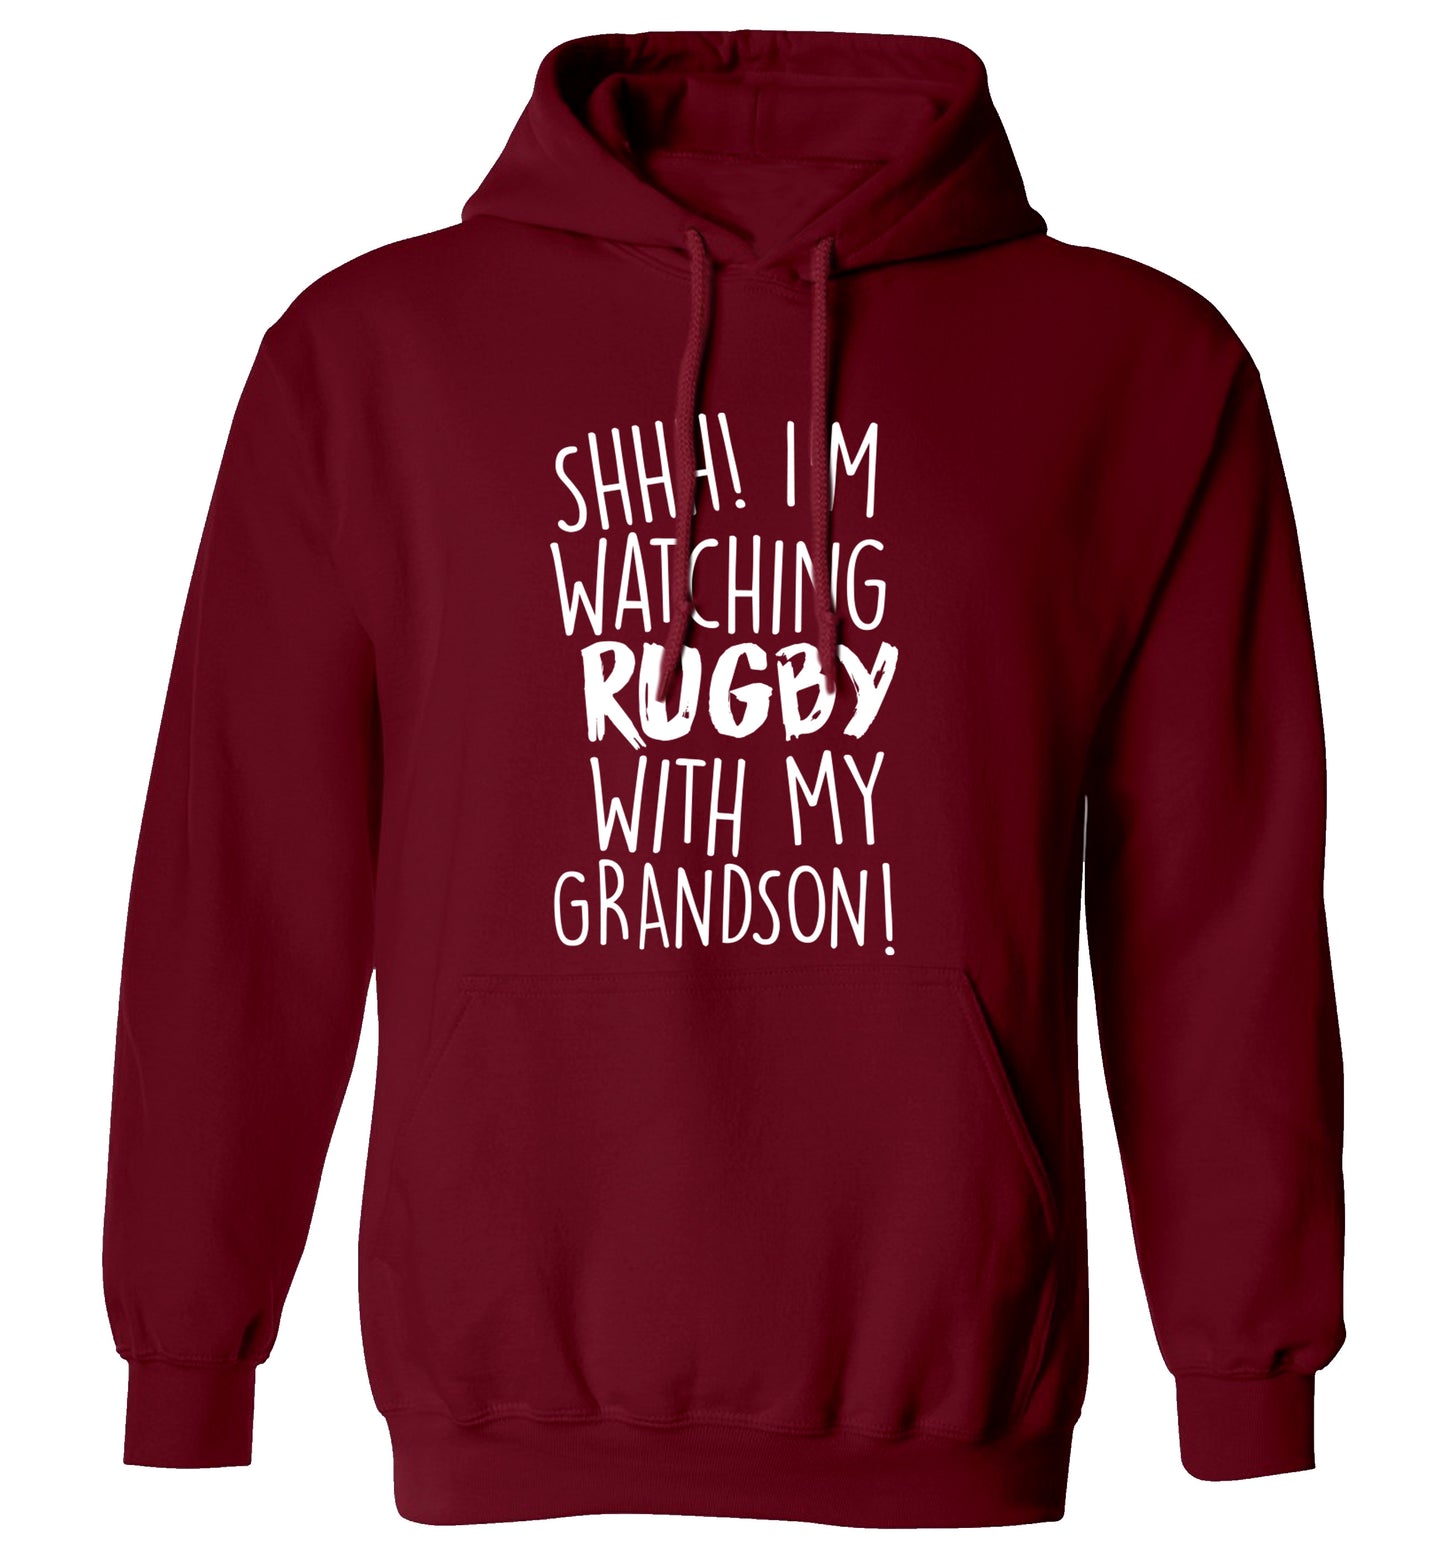 Shh I'm watching rugby with my grandson adults unisex maroon hoodie 2XL